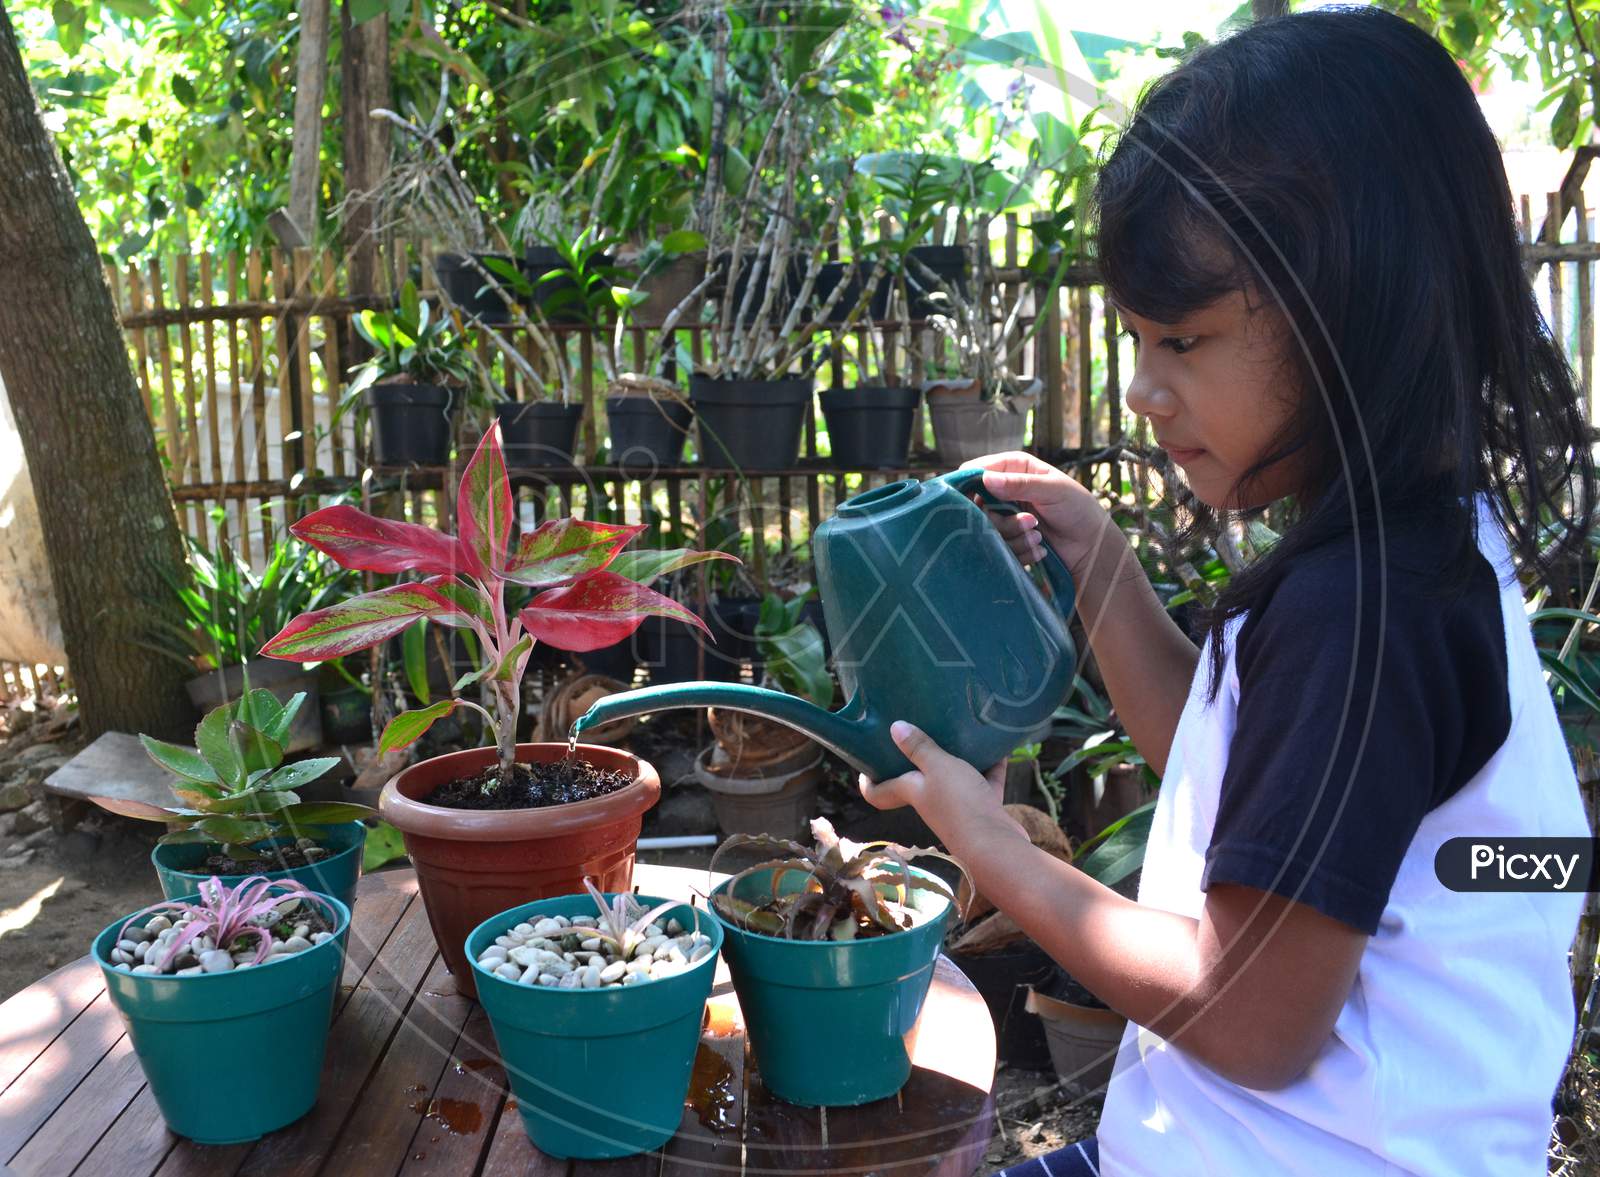 Little Girl Sit While Watering The Aglaonema Plant On The Table With A Watering Can